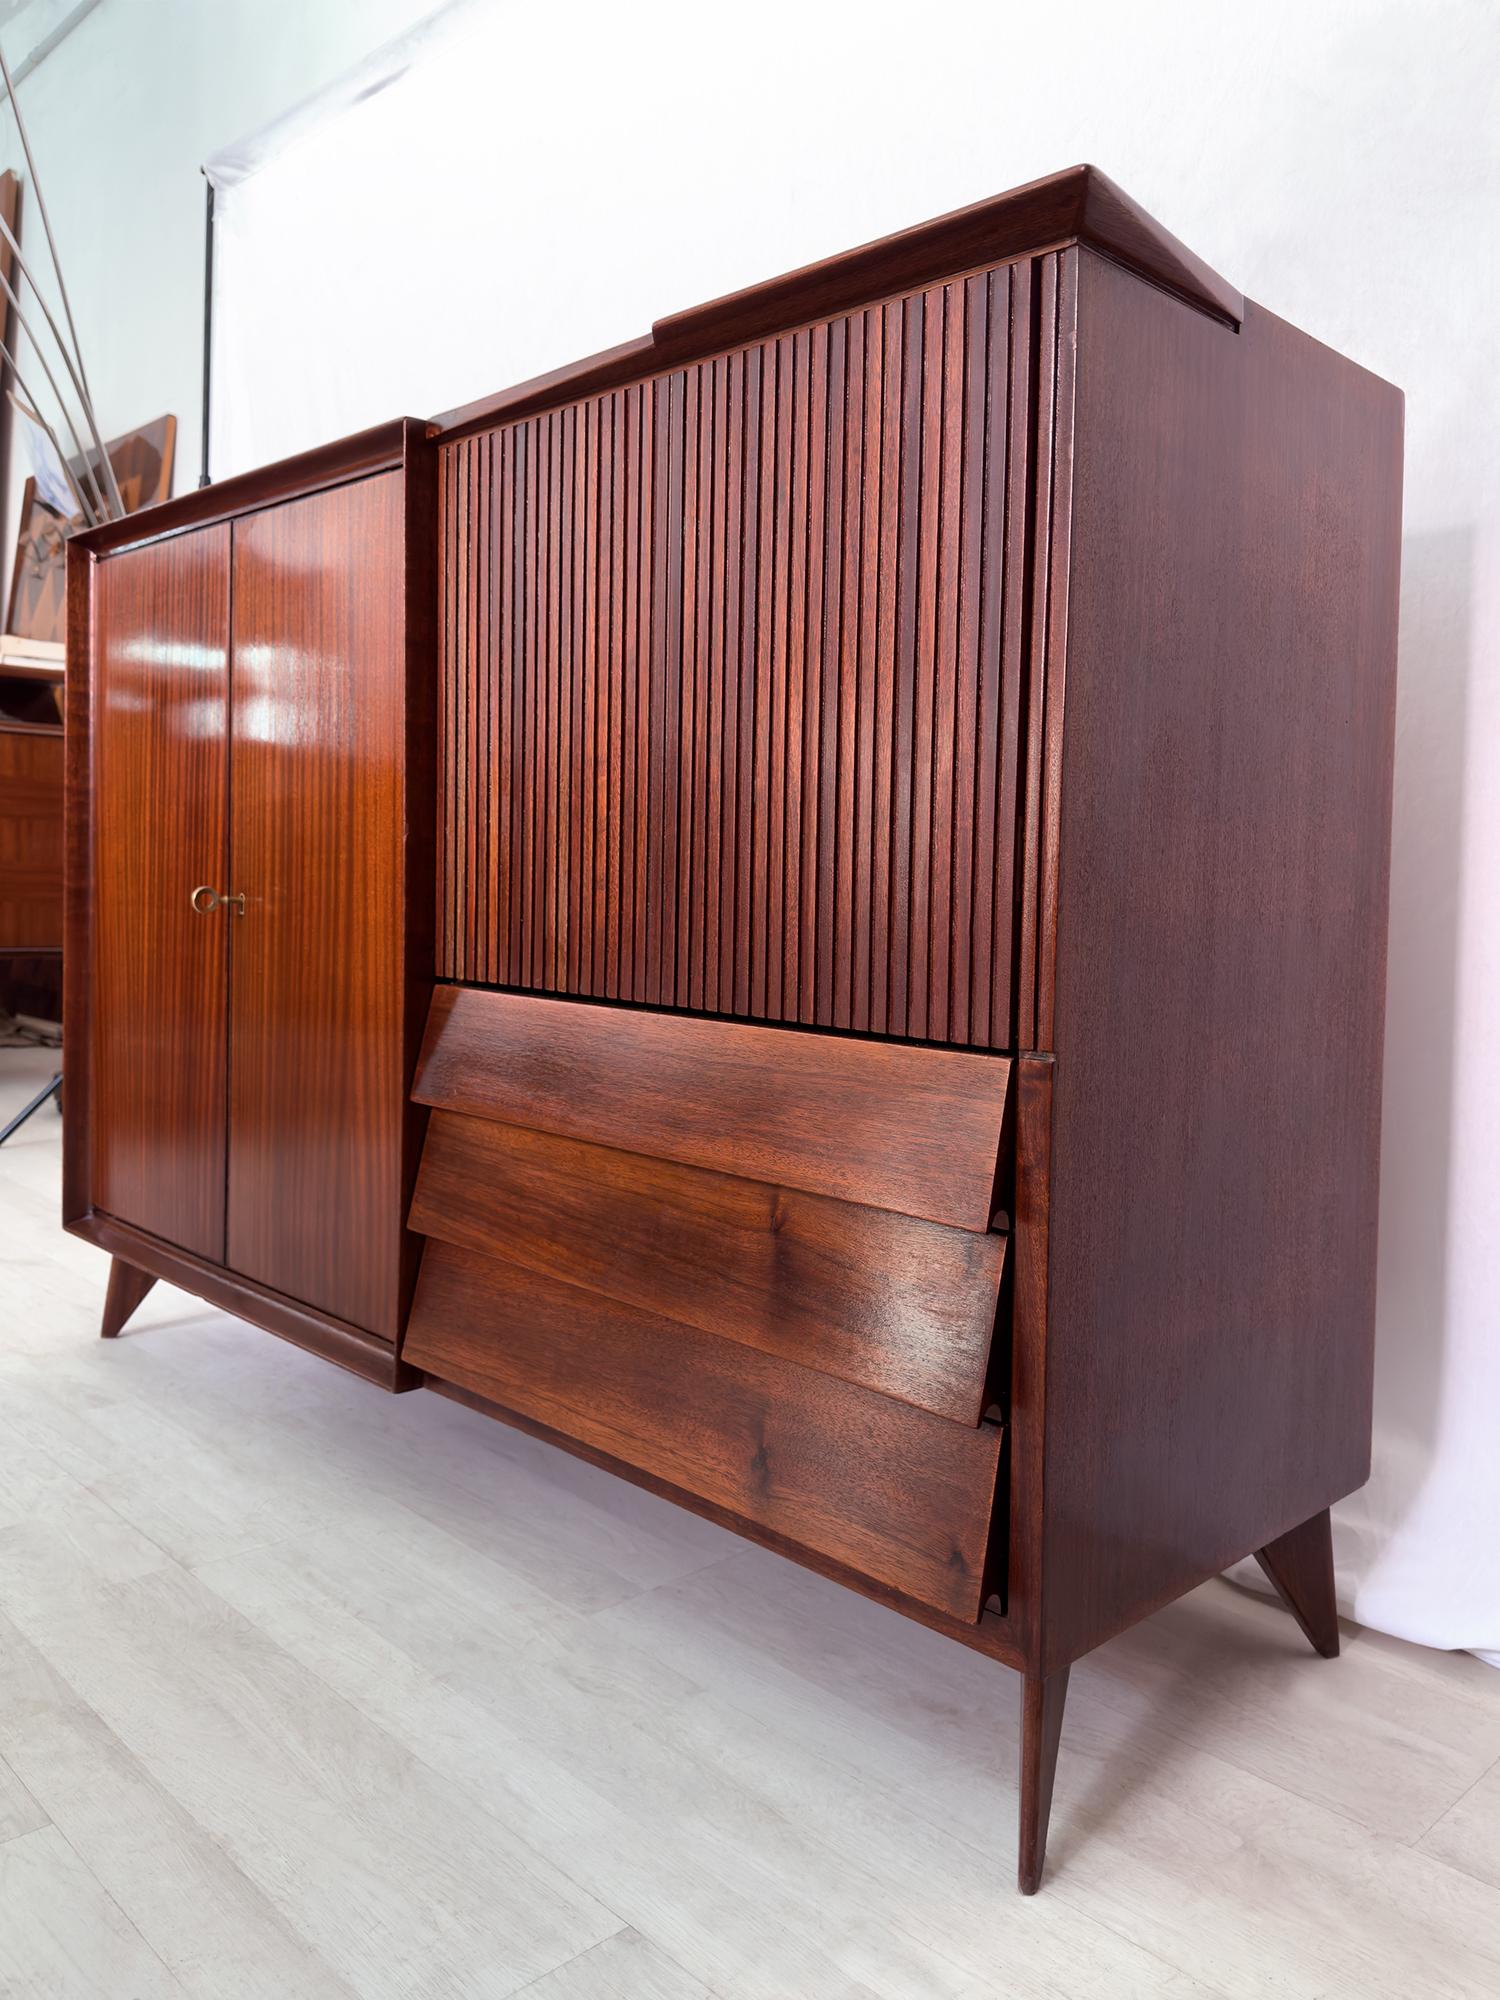 Mid-Century Modern Italian Mid-Century Teak Wood Sideboard with Bar Cabinet by Vittorio Dassi, 1950s For Sale